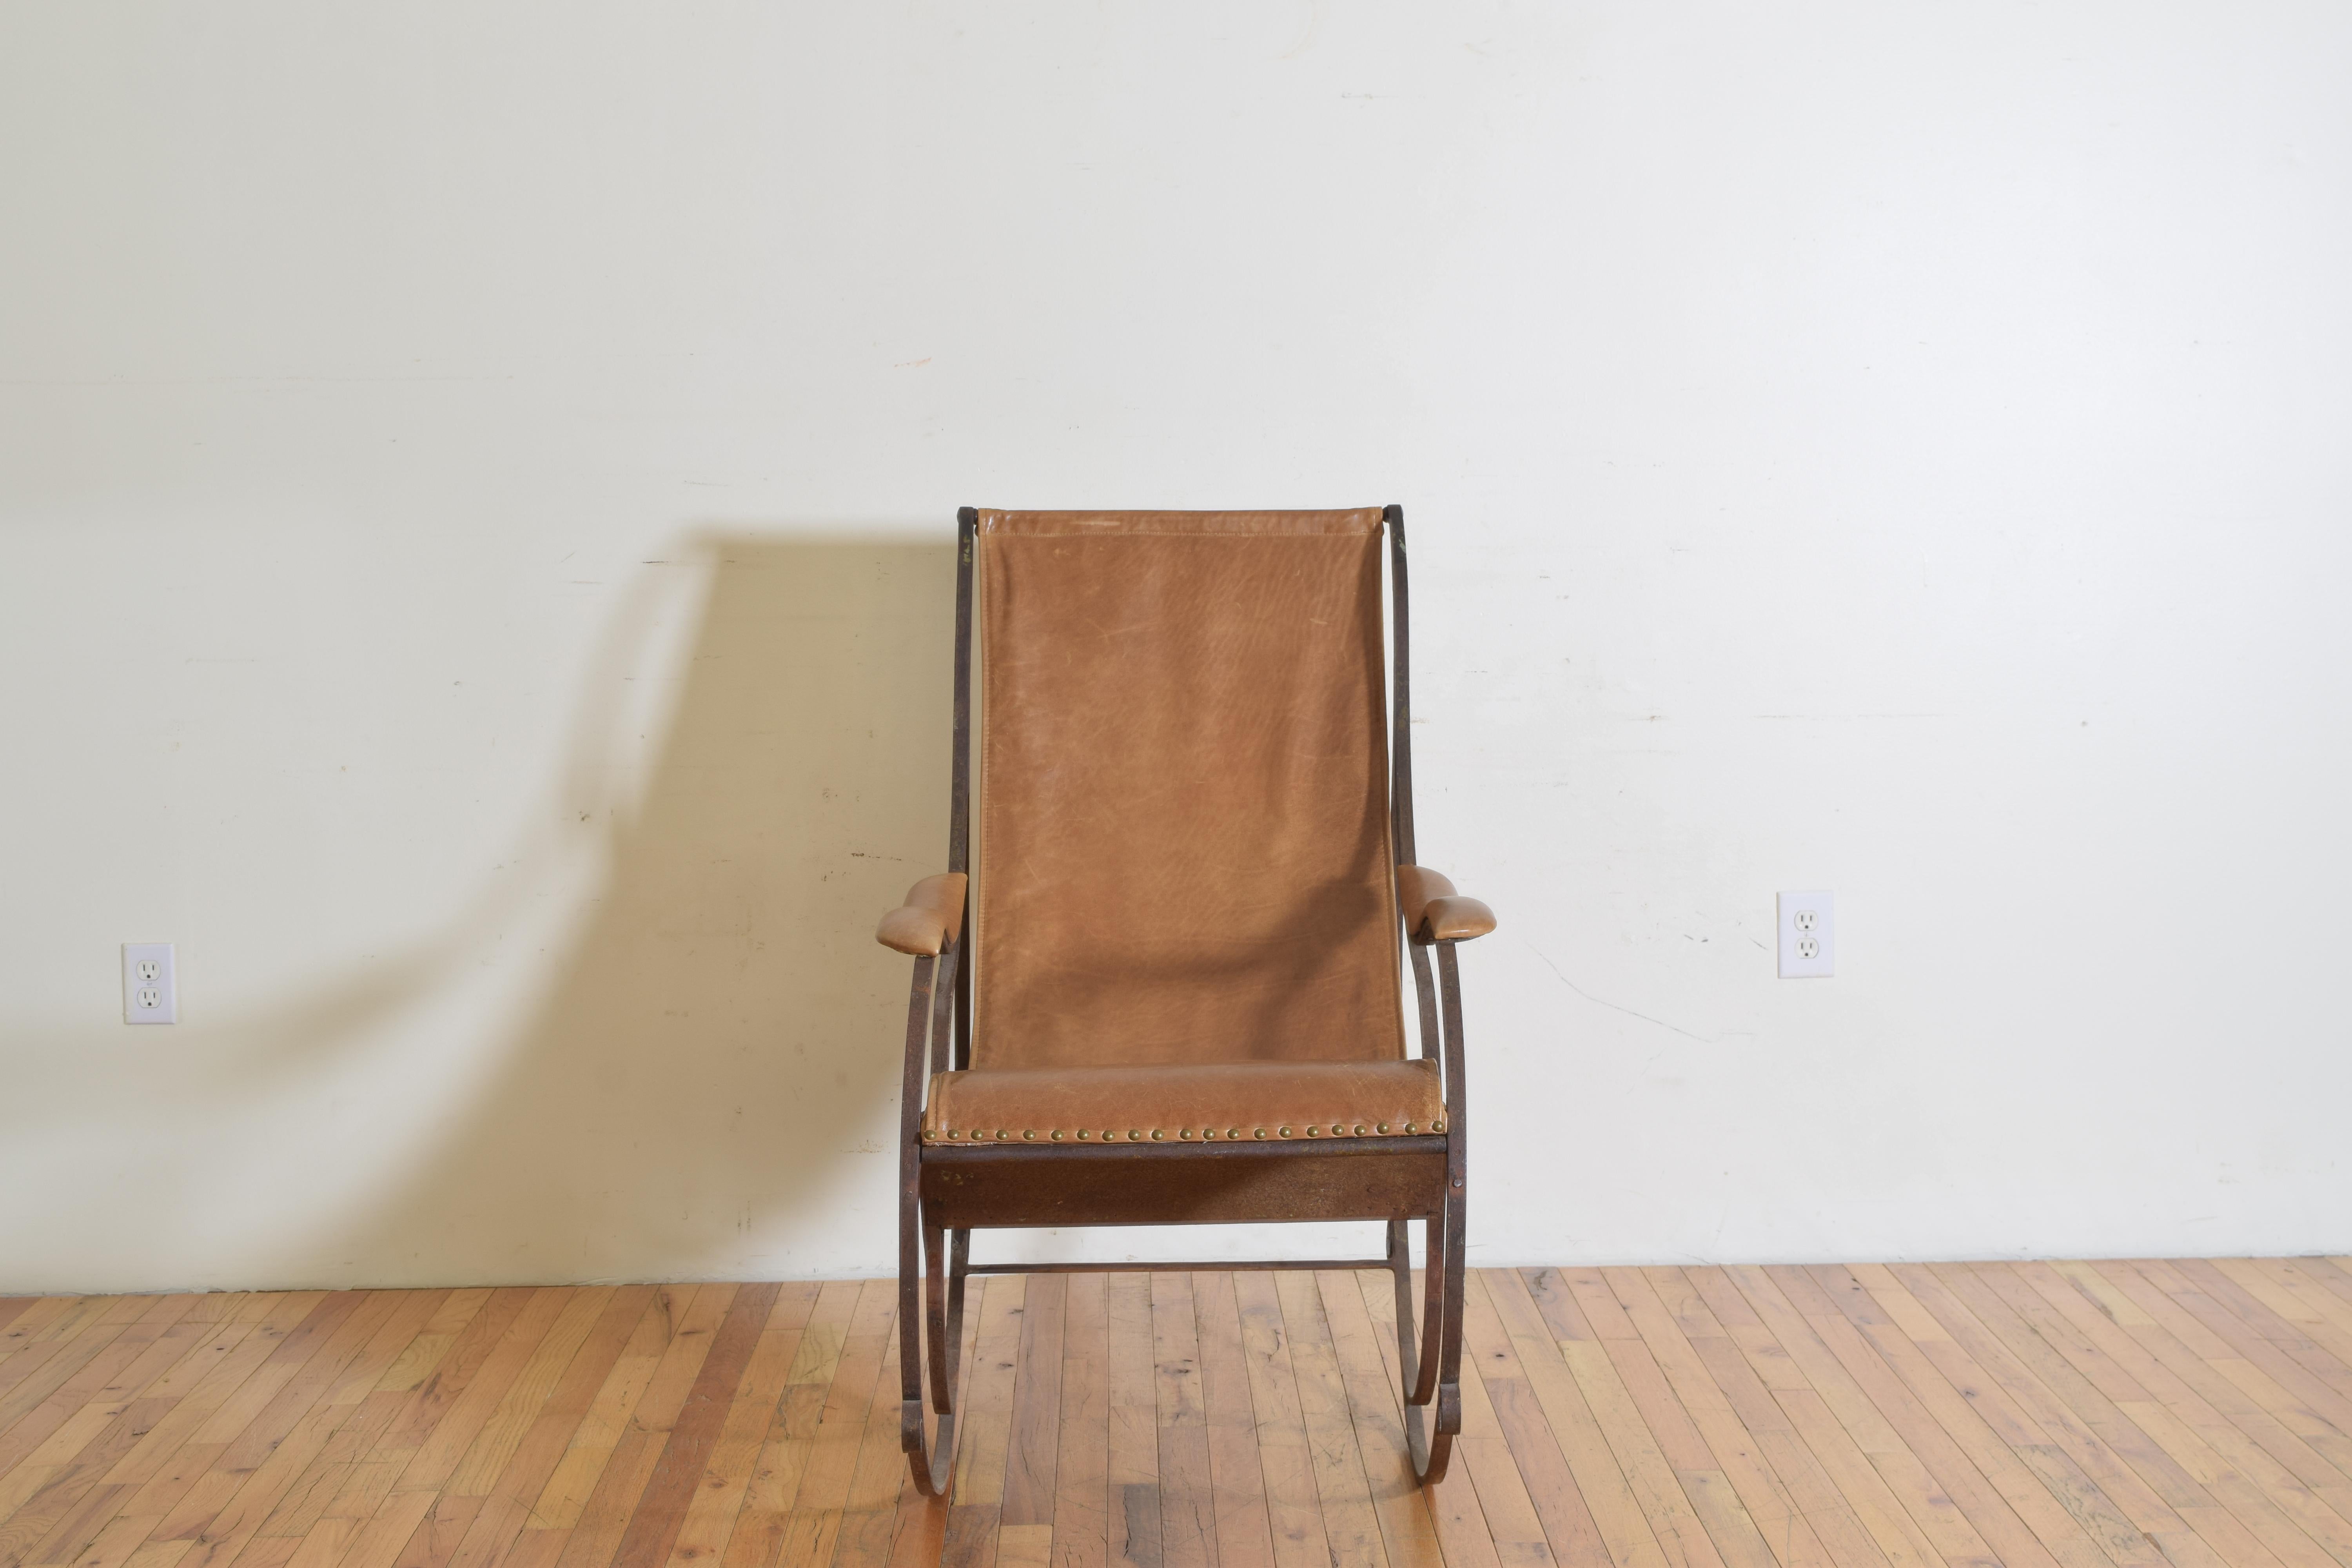 Late 19th Century French Wrought Iron and Leather Upholstered Rocking Chair